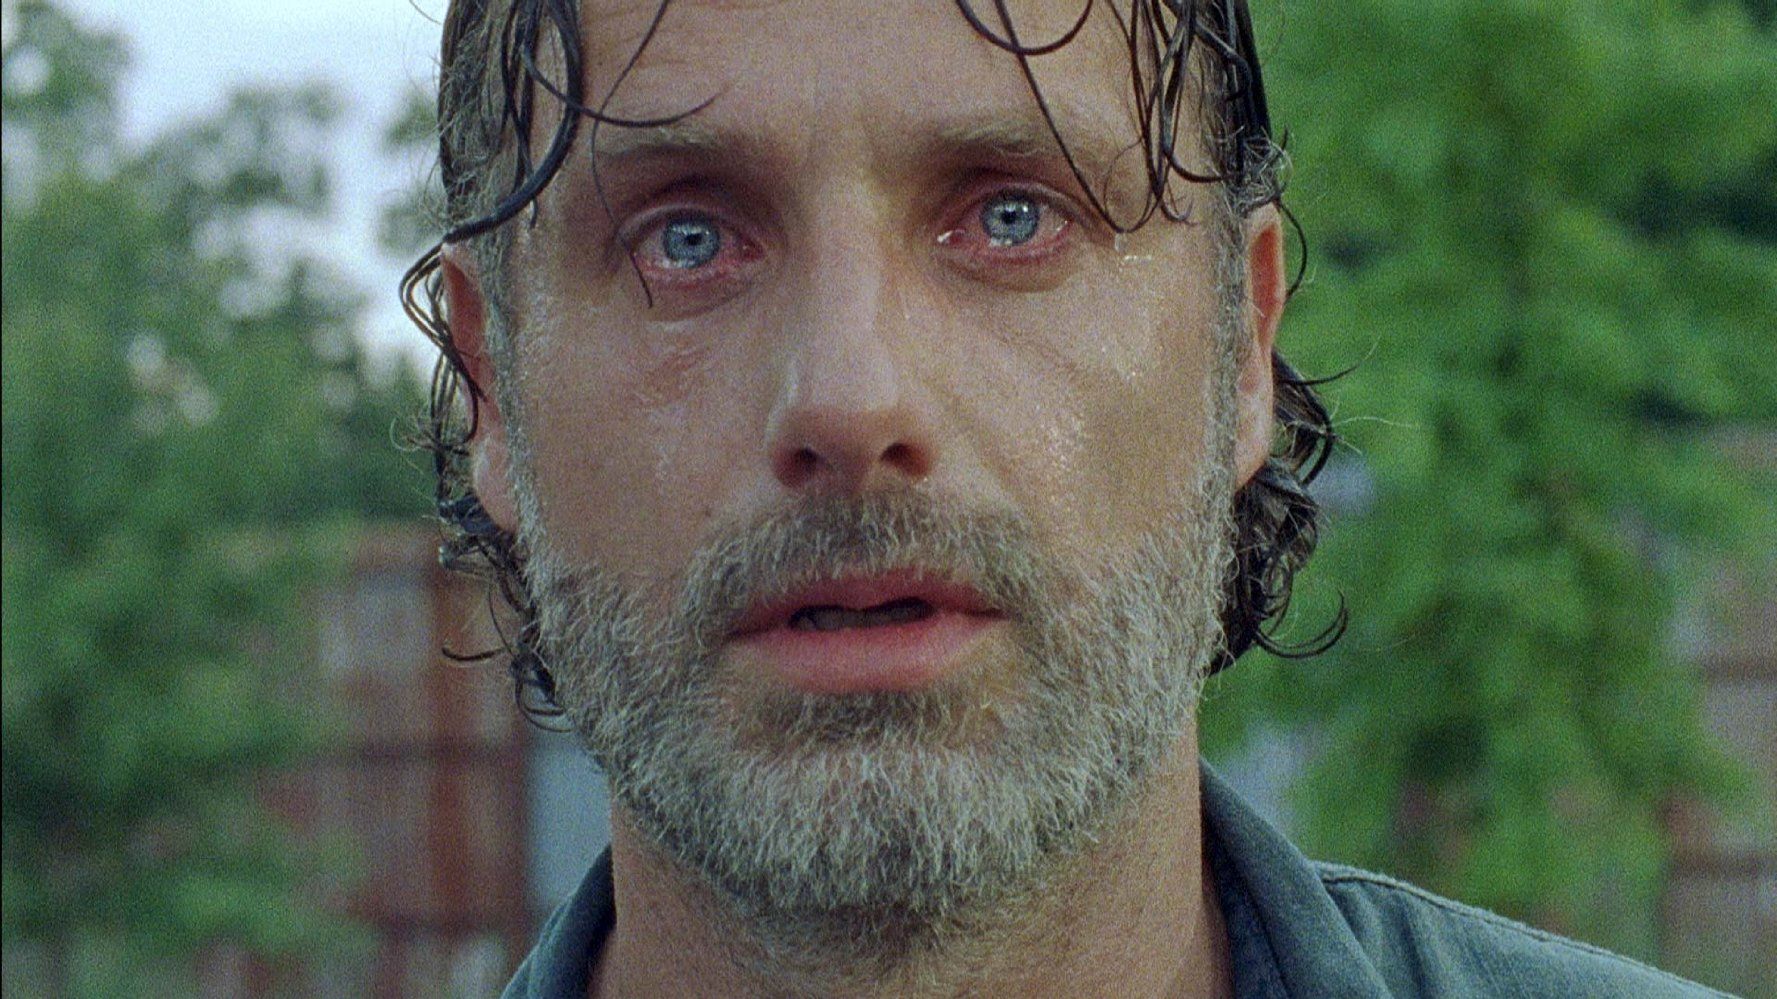 Rick, with tears in his eyes, ooks traumatized in a scene from 'The Walking Dead' Season 7.